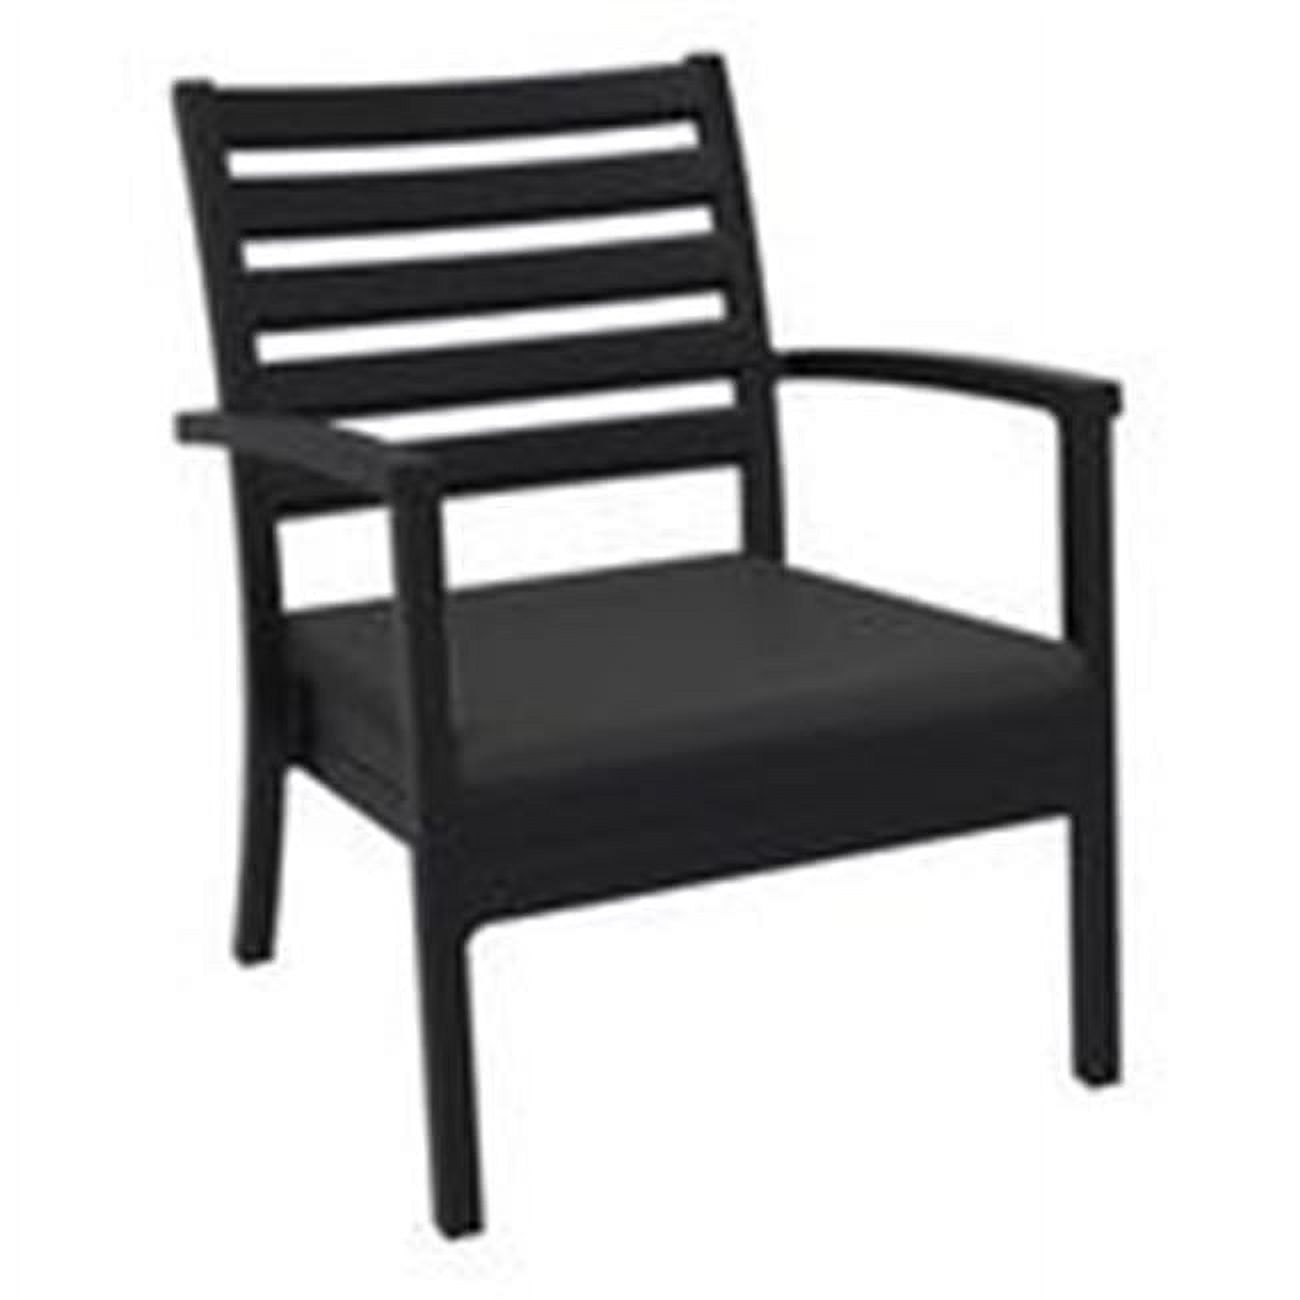 Siesta ISP004-BLA-CCH Artemis XL Outdoor Club Chair with Sunbrella Charcoal Cushion - Black -  set of 2 - image 1 of 4